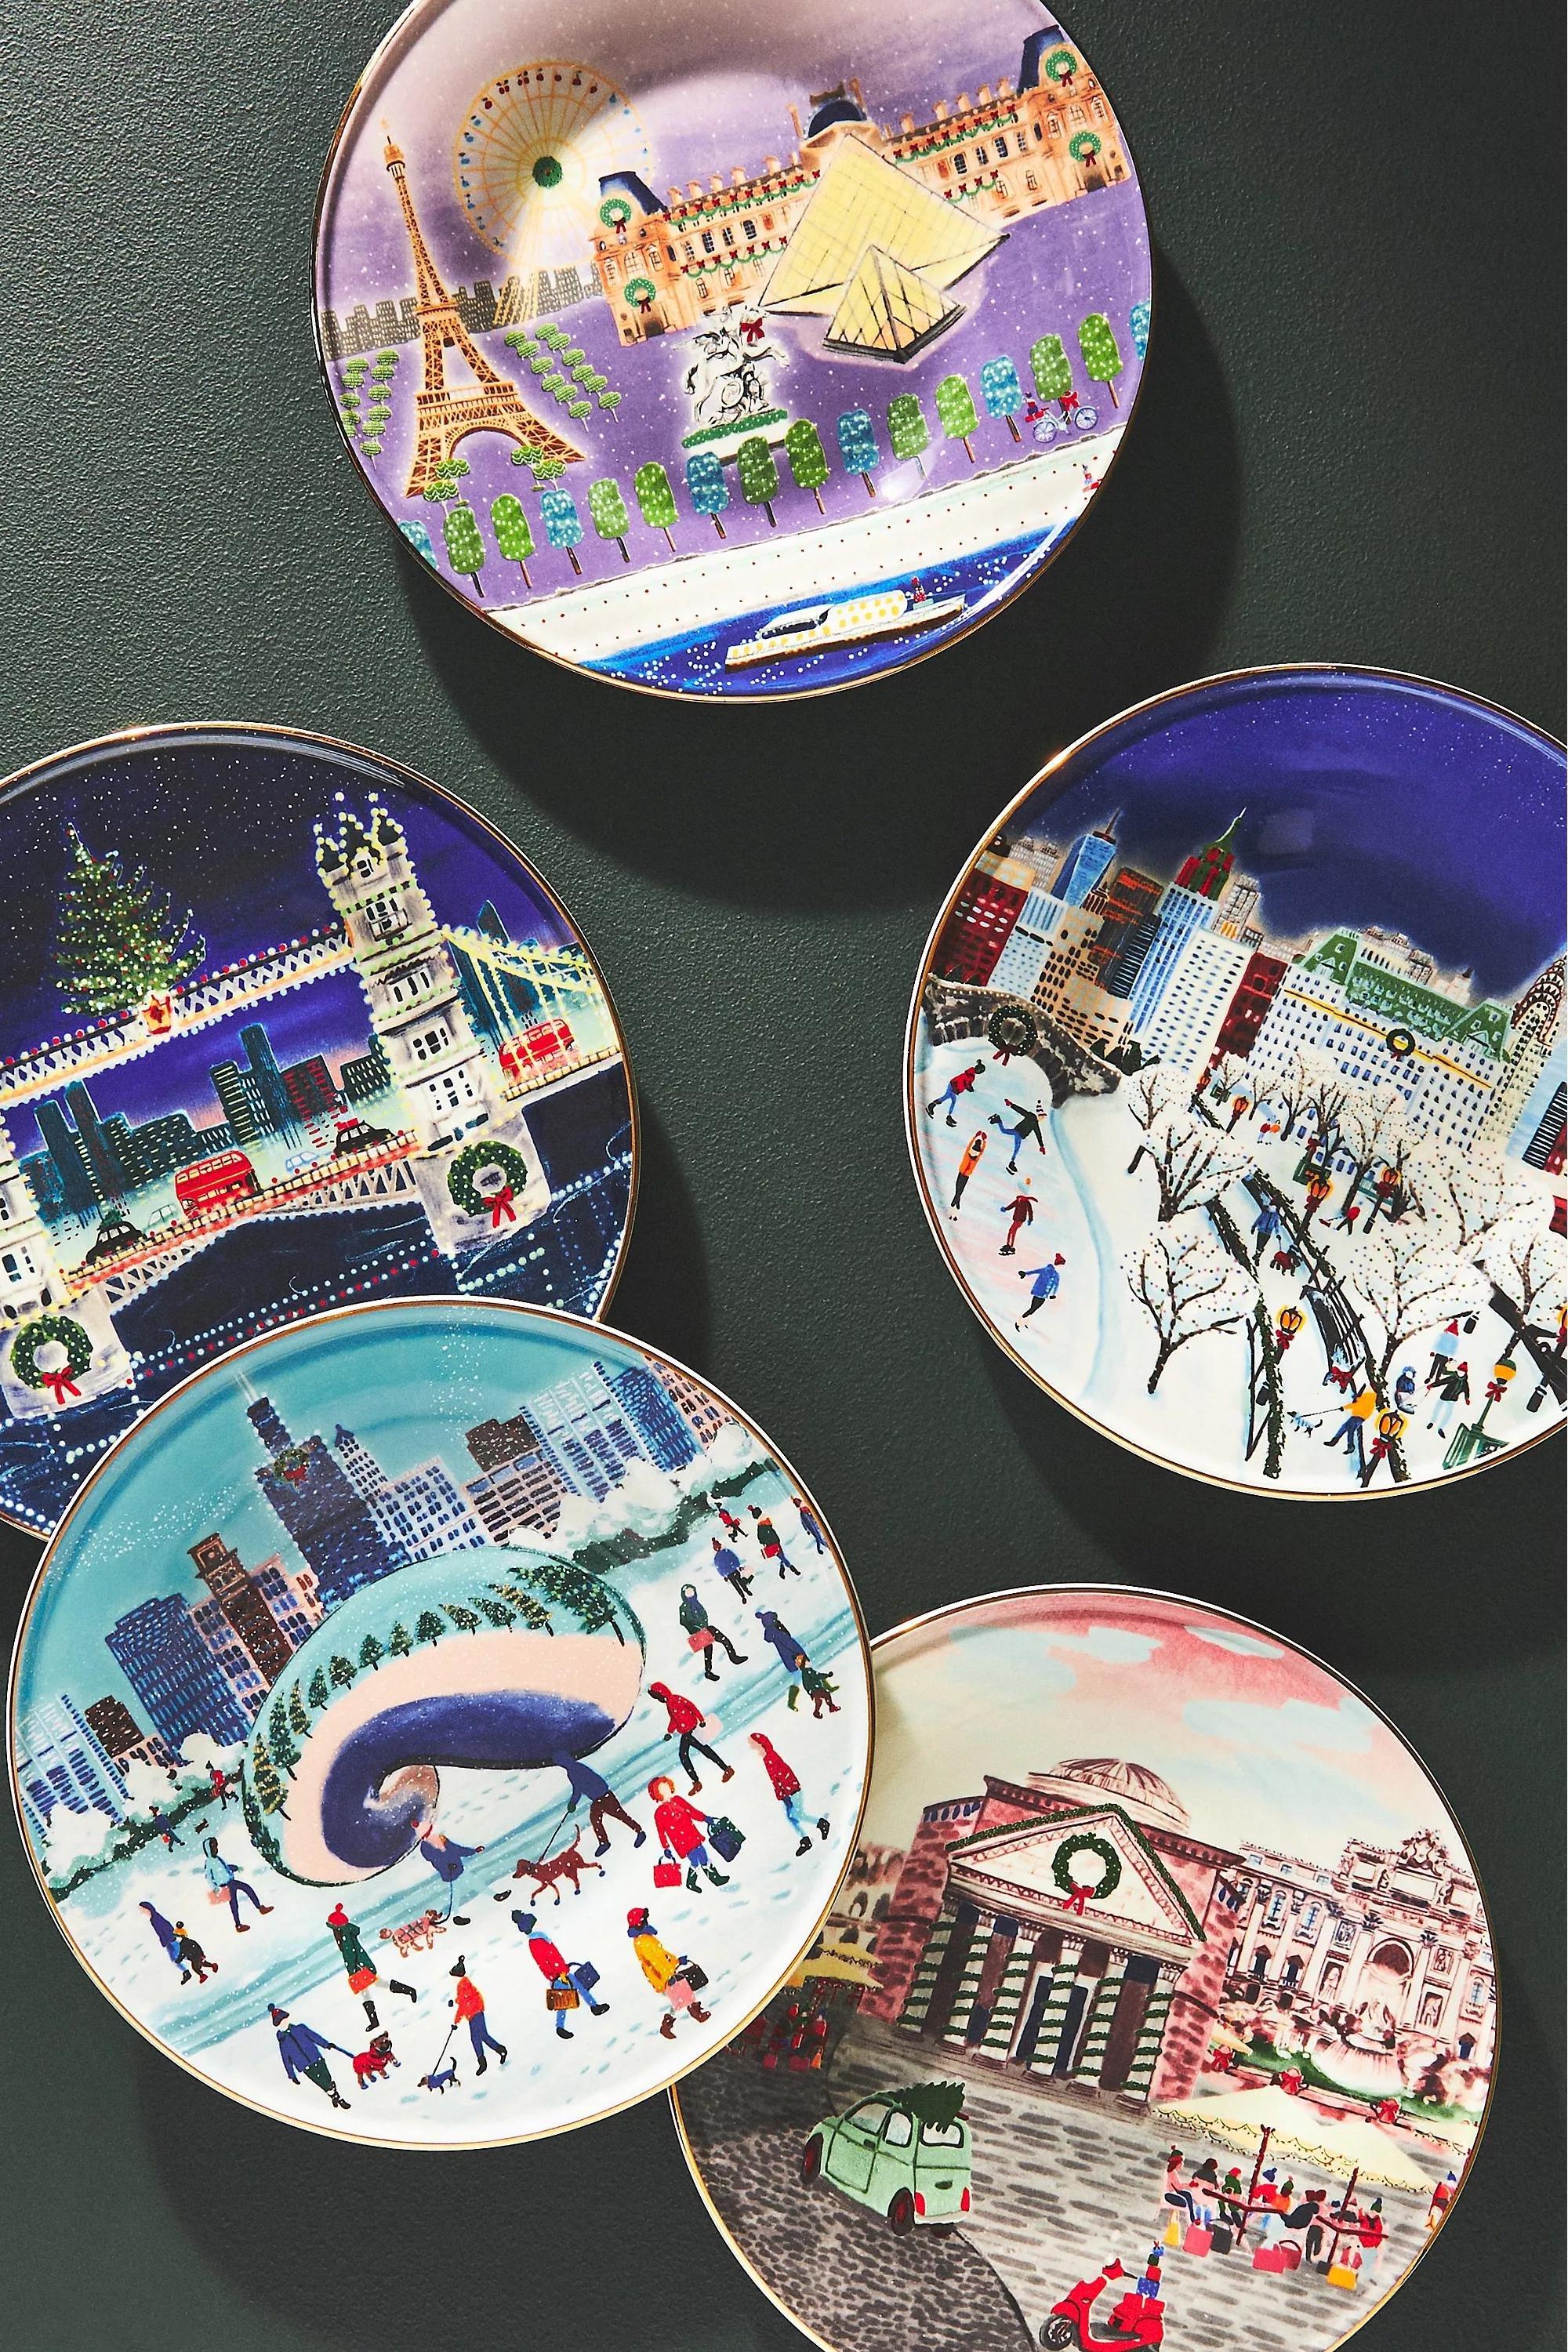 Anthropologie - Holiday In The City Dessert Plate, Purple